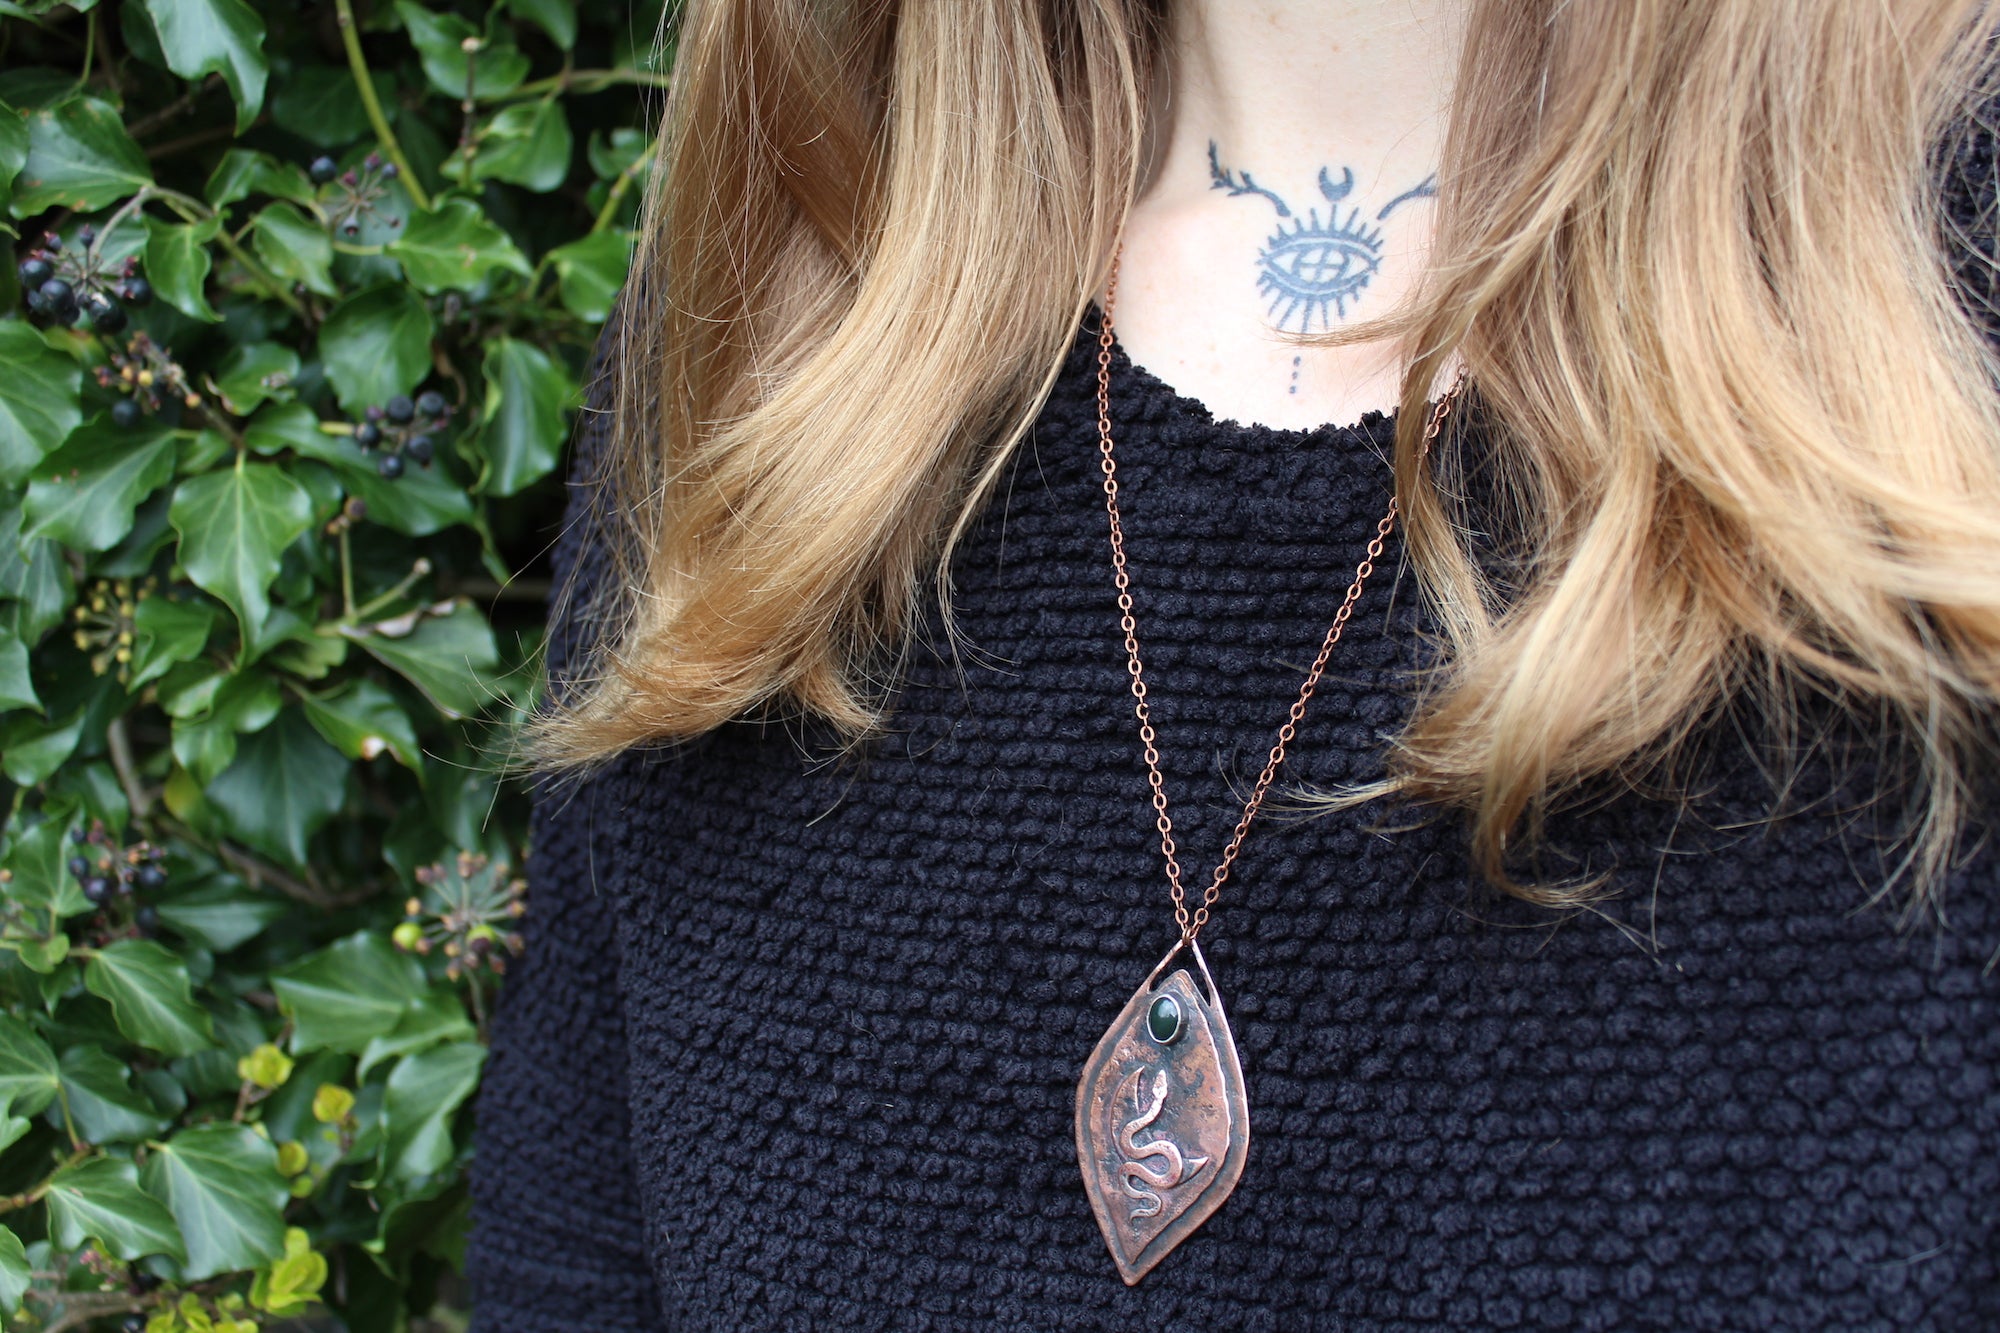 SERPENT YONI Handmade Copper Necklace with Bloodstone